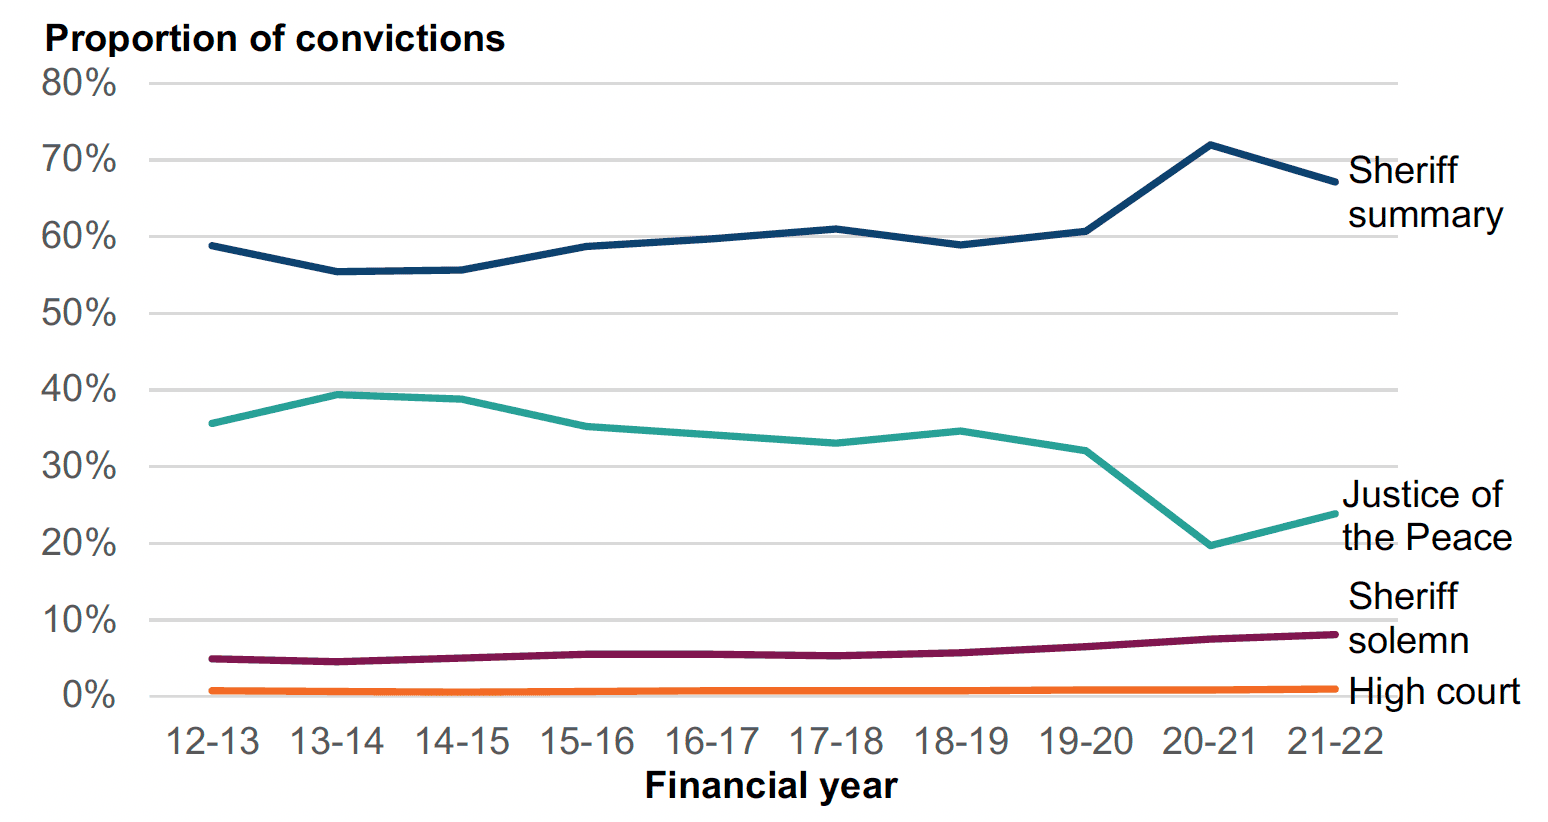 A line chart showing that of the four types of court procedure, Justice of the Peace has shown a decline across the last ten years, falling from around a third to a quarter of all convictions. In the same span Sheriff Summary rose to make up around two-thirds of convictions, with the two solemn courts (High Court and Sheriff Solemn) collectively approaching one-tenth of convictions.